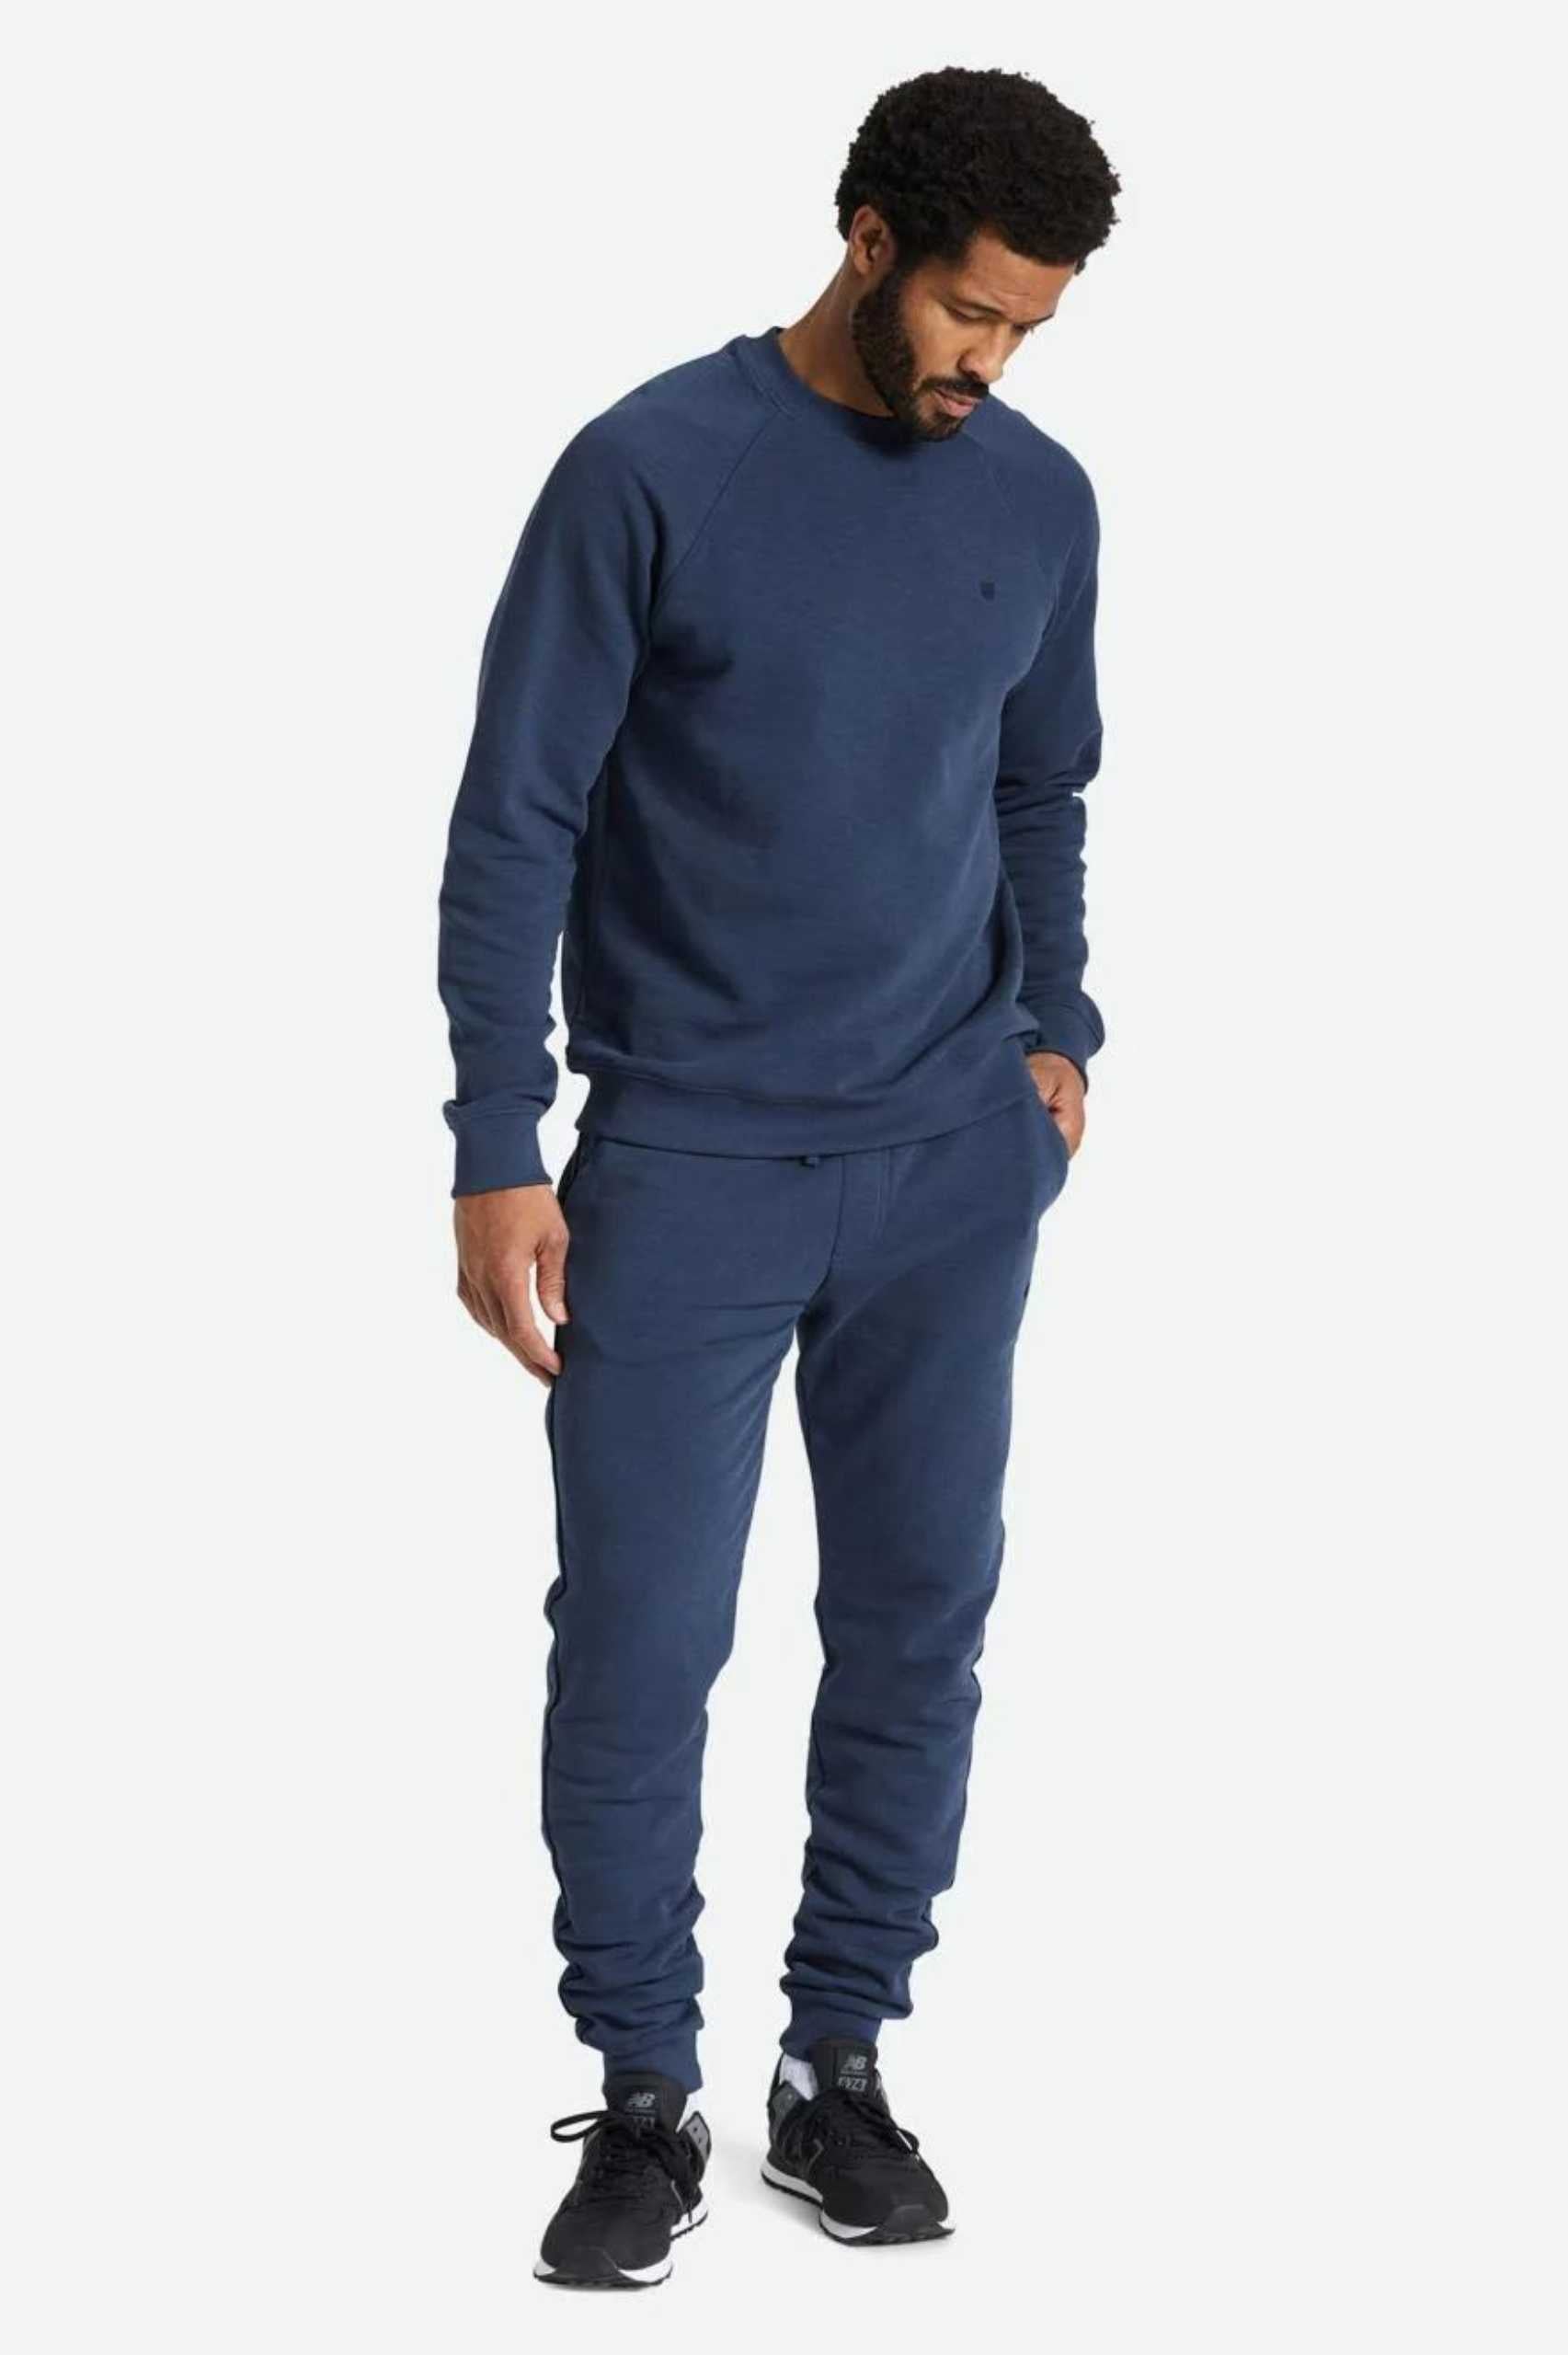 Brixton Mens Summer Weight French Terry Crew in Washed Navy